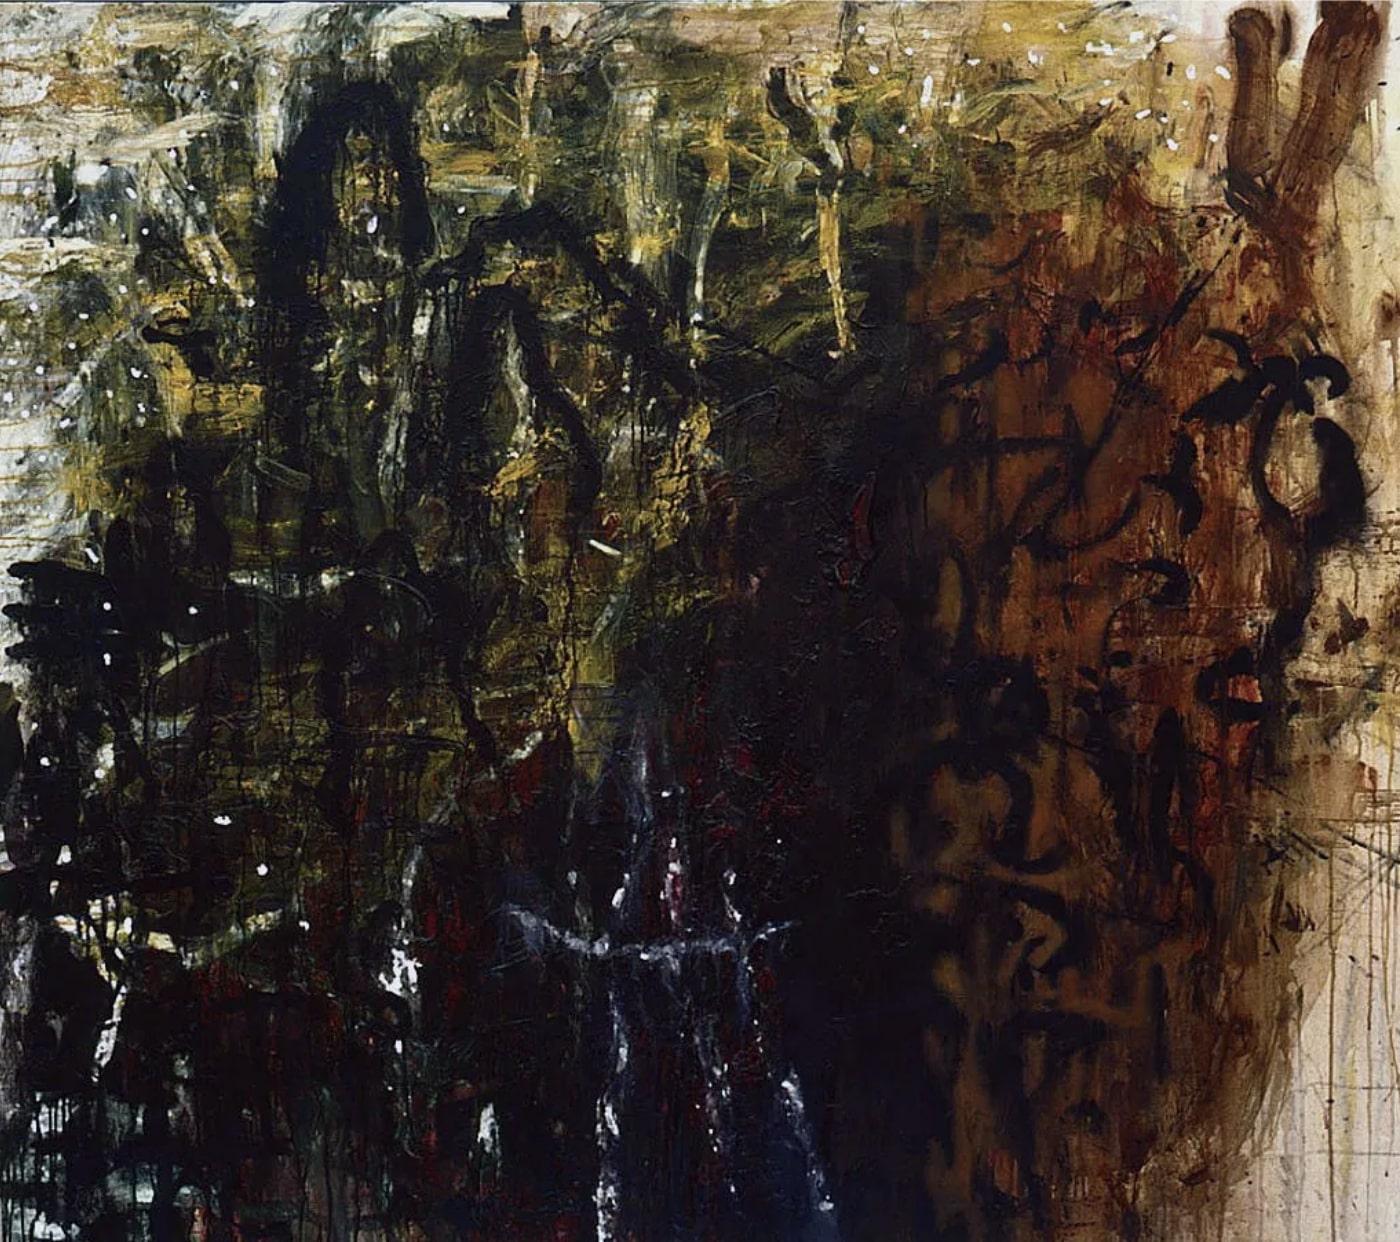 PHALLOCENTRIC PAINTING (FOR MB), 1985
Oil on canvas
66 1/8 x 75 in
168 x 190.5 cm